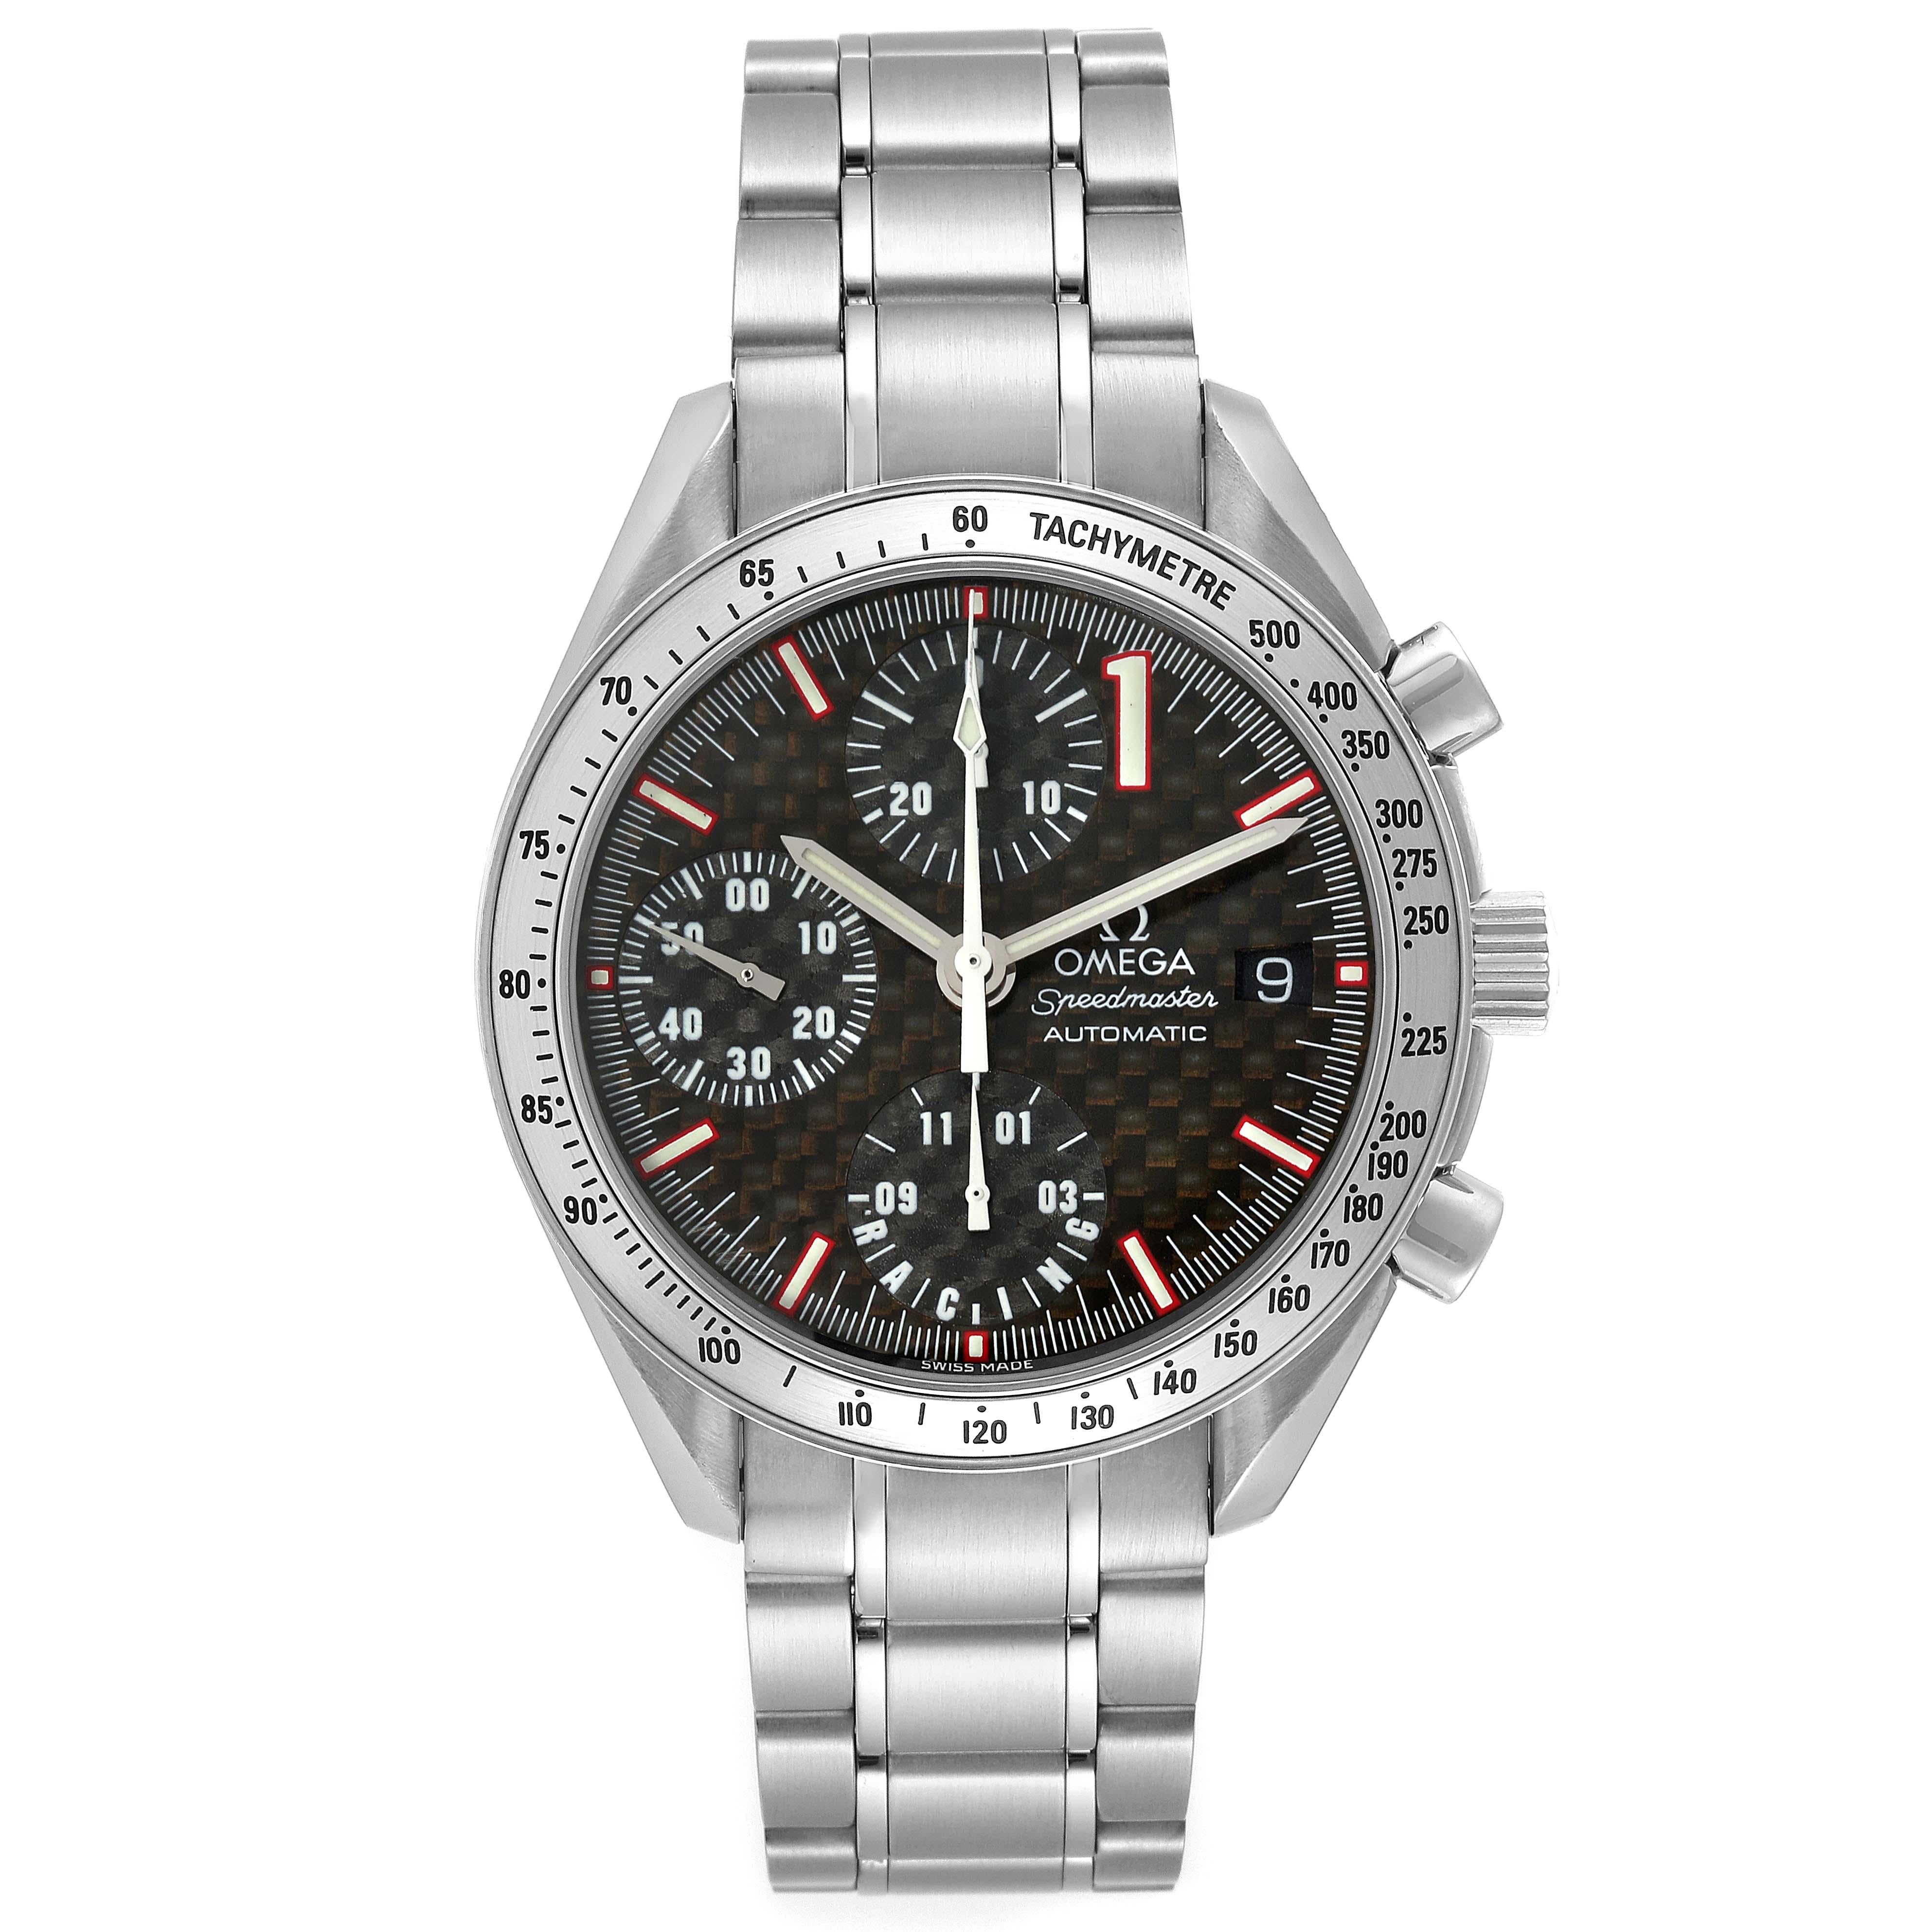 Omega Speedmaster Schumacher Racing LE Steel Mens Watch 3519.50.00 Box Card. Automatic self-winding chronograph movement. Stainless steel round case 39.0 mm in diameter. Caseback engraved with Michael Schumacher's signature and inscription 'World